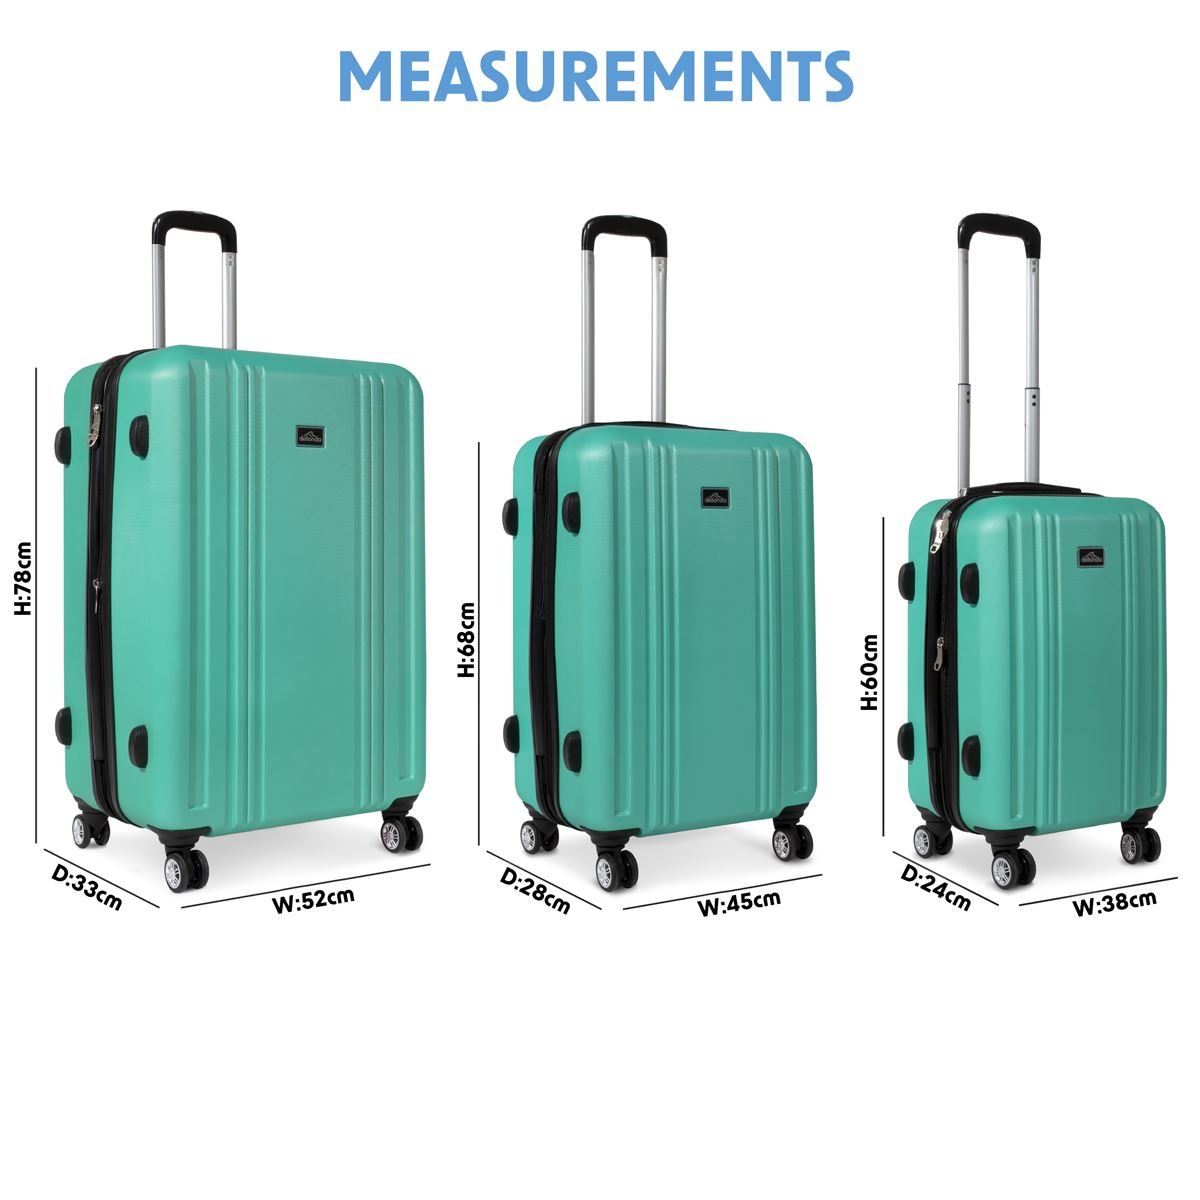 Dellonda Set 3-Piece Lightweight ABS Luggage Set with Integrated TSA Approved Combination Lock - Teal - DL126